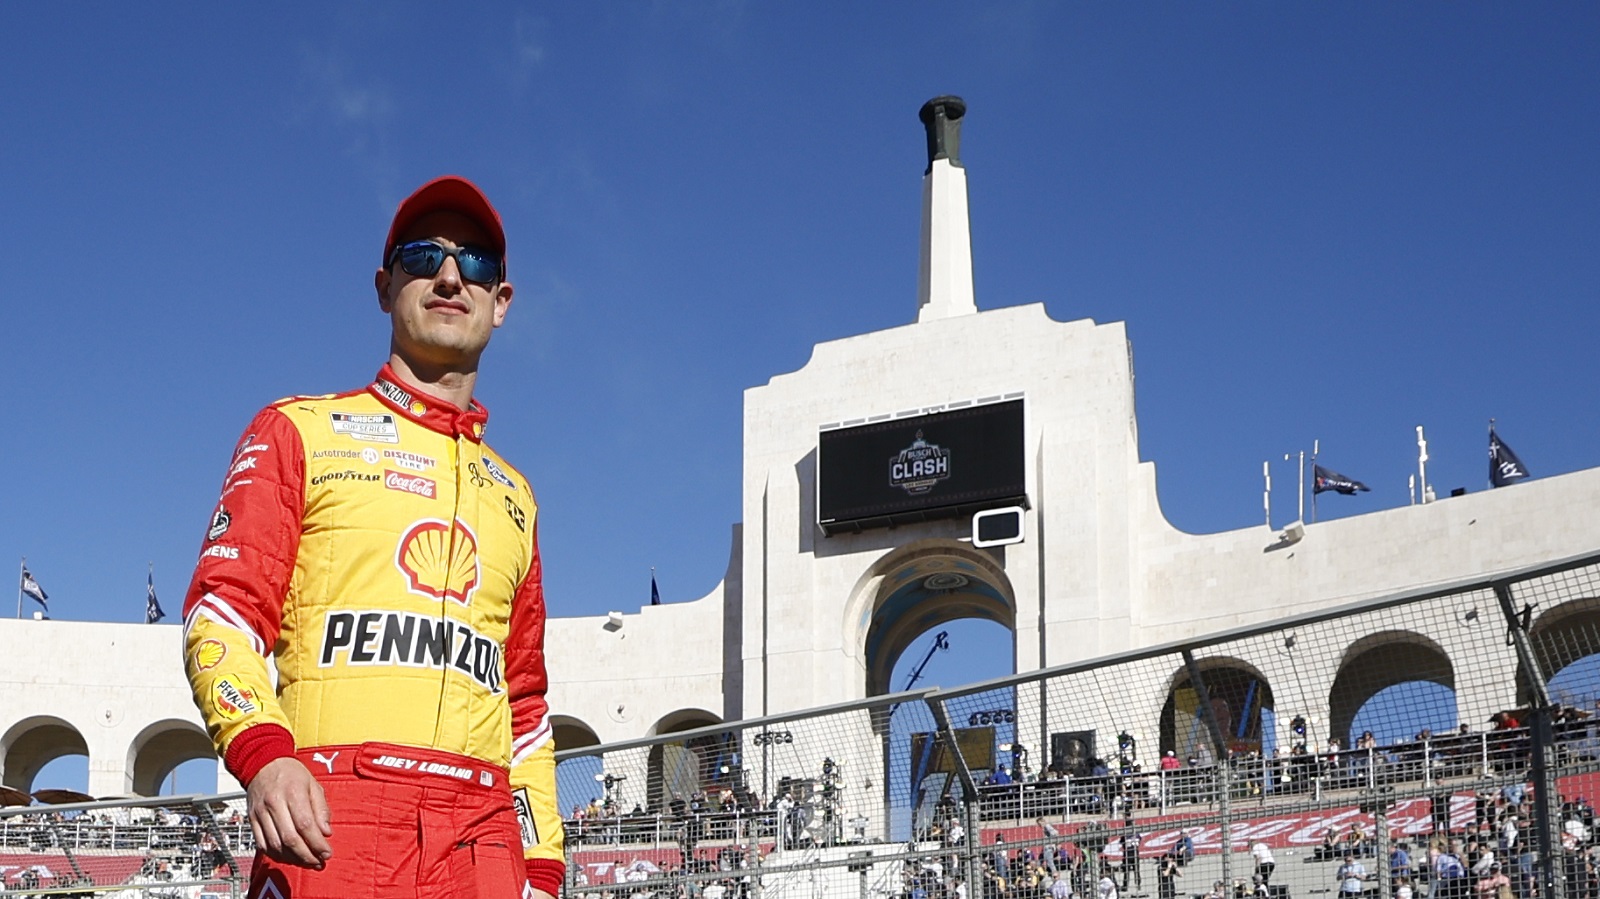 Joey Logano walks the track during driver intros prior to the NASCAR Cup Series Busch Light Clash at the Los Angeles Memorial Coliseum on Feb. 06, 2022.